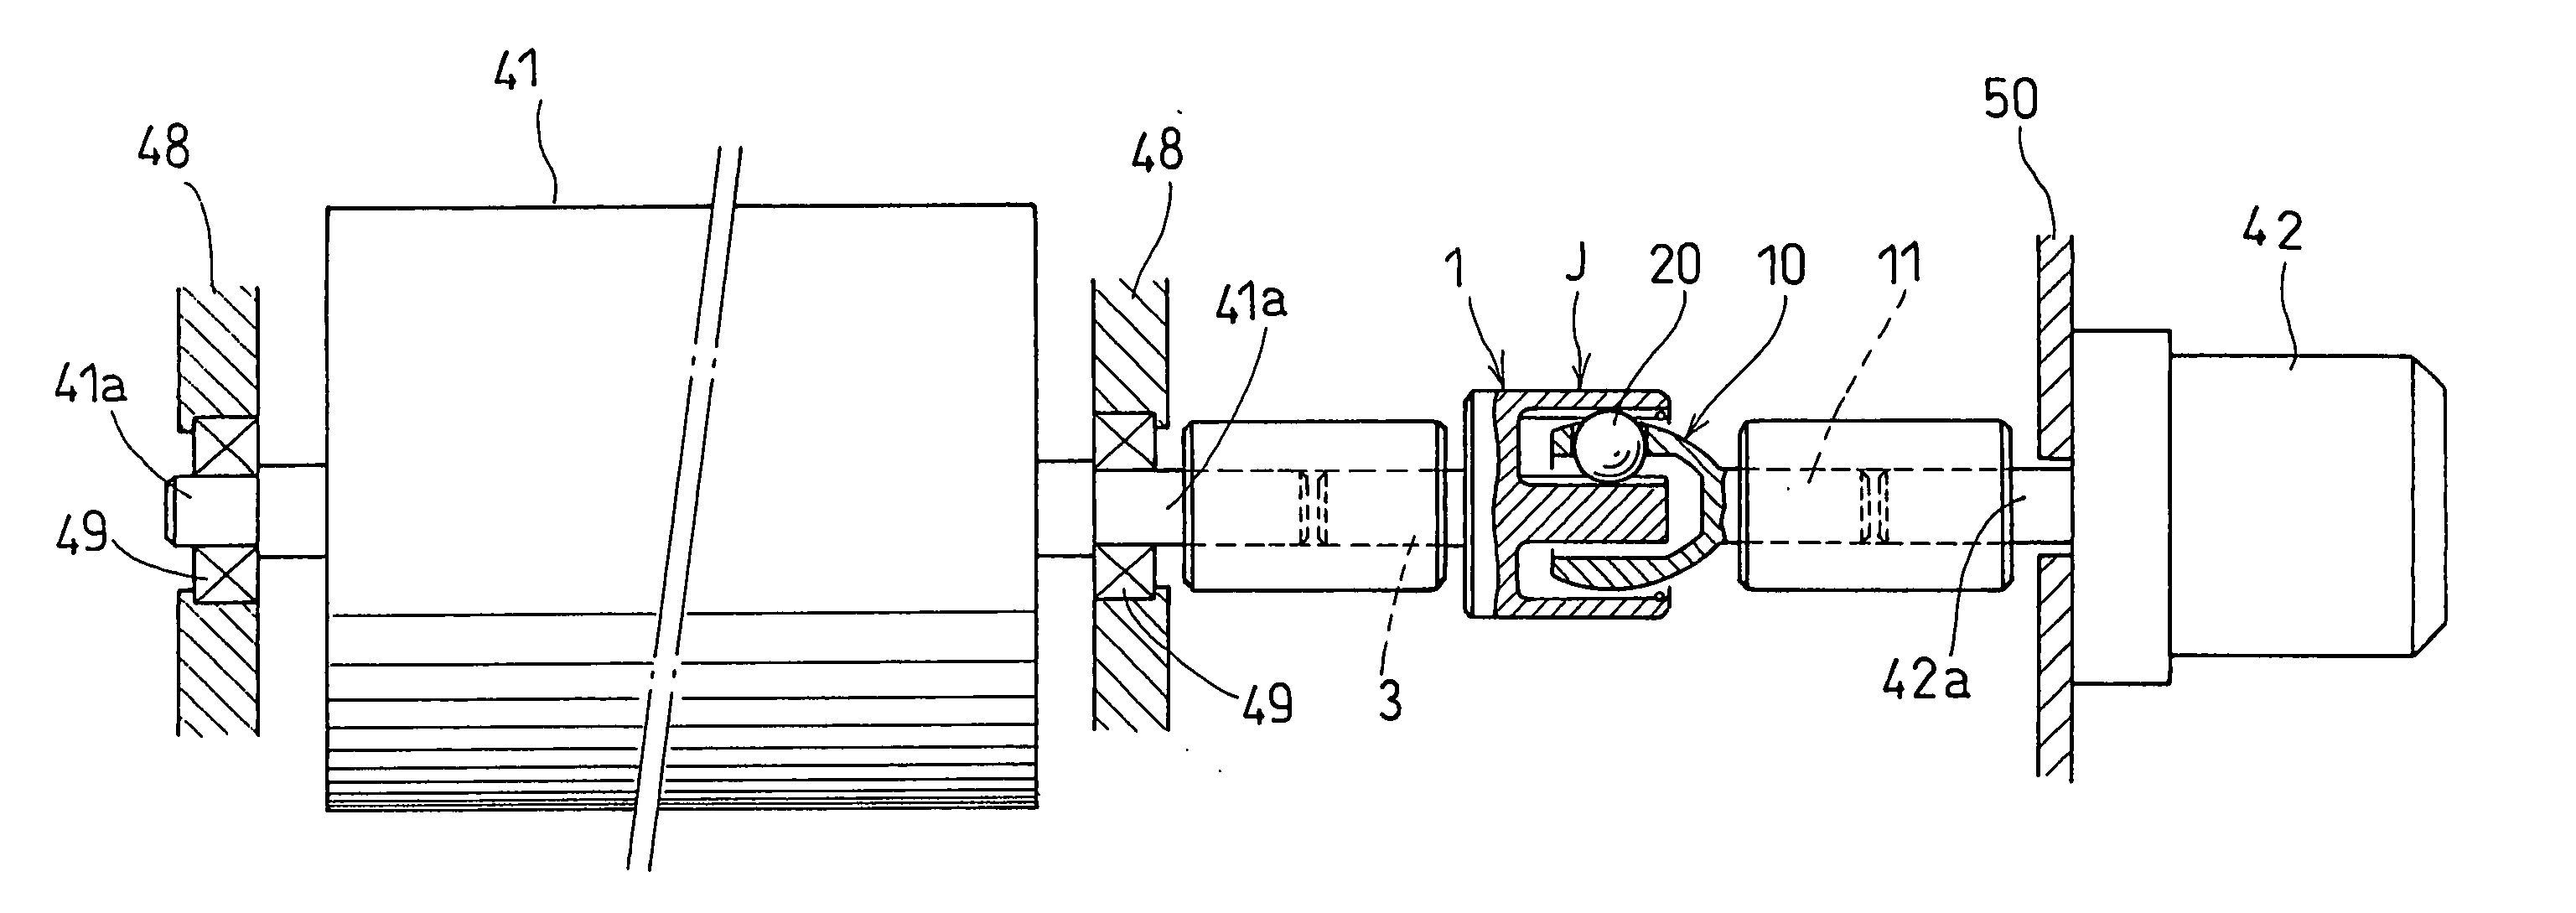 Constant-velocity joint and image-forming device